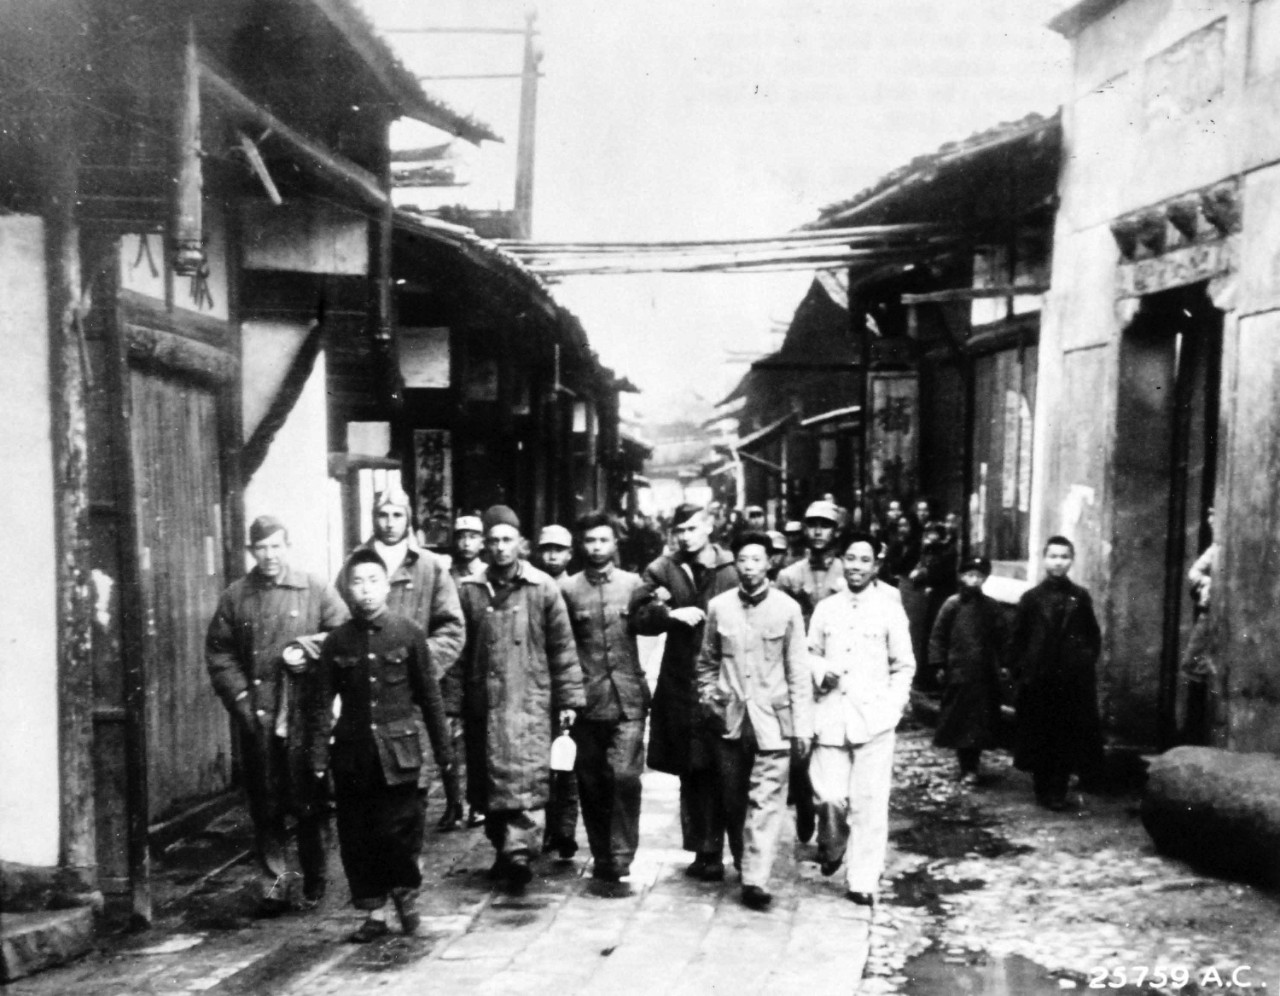 111-SC-A-25759AC-1:   Doolittle Raid on Japan, April 18, 1942.  Chinese soldiers bring in a group of General Doolittle’s Tokyo Raiders to the tiny village near where their bomber crashed.  Center right, his arm held by a Chinese, is Colonel John Hilger, who was injured, April 21.    U.S. Army photograph, now in the collections of the National Archives.  (2017/05/02).